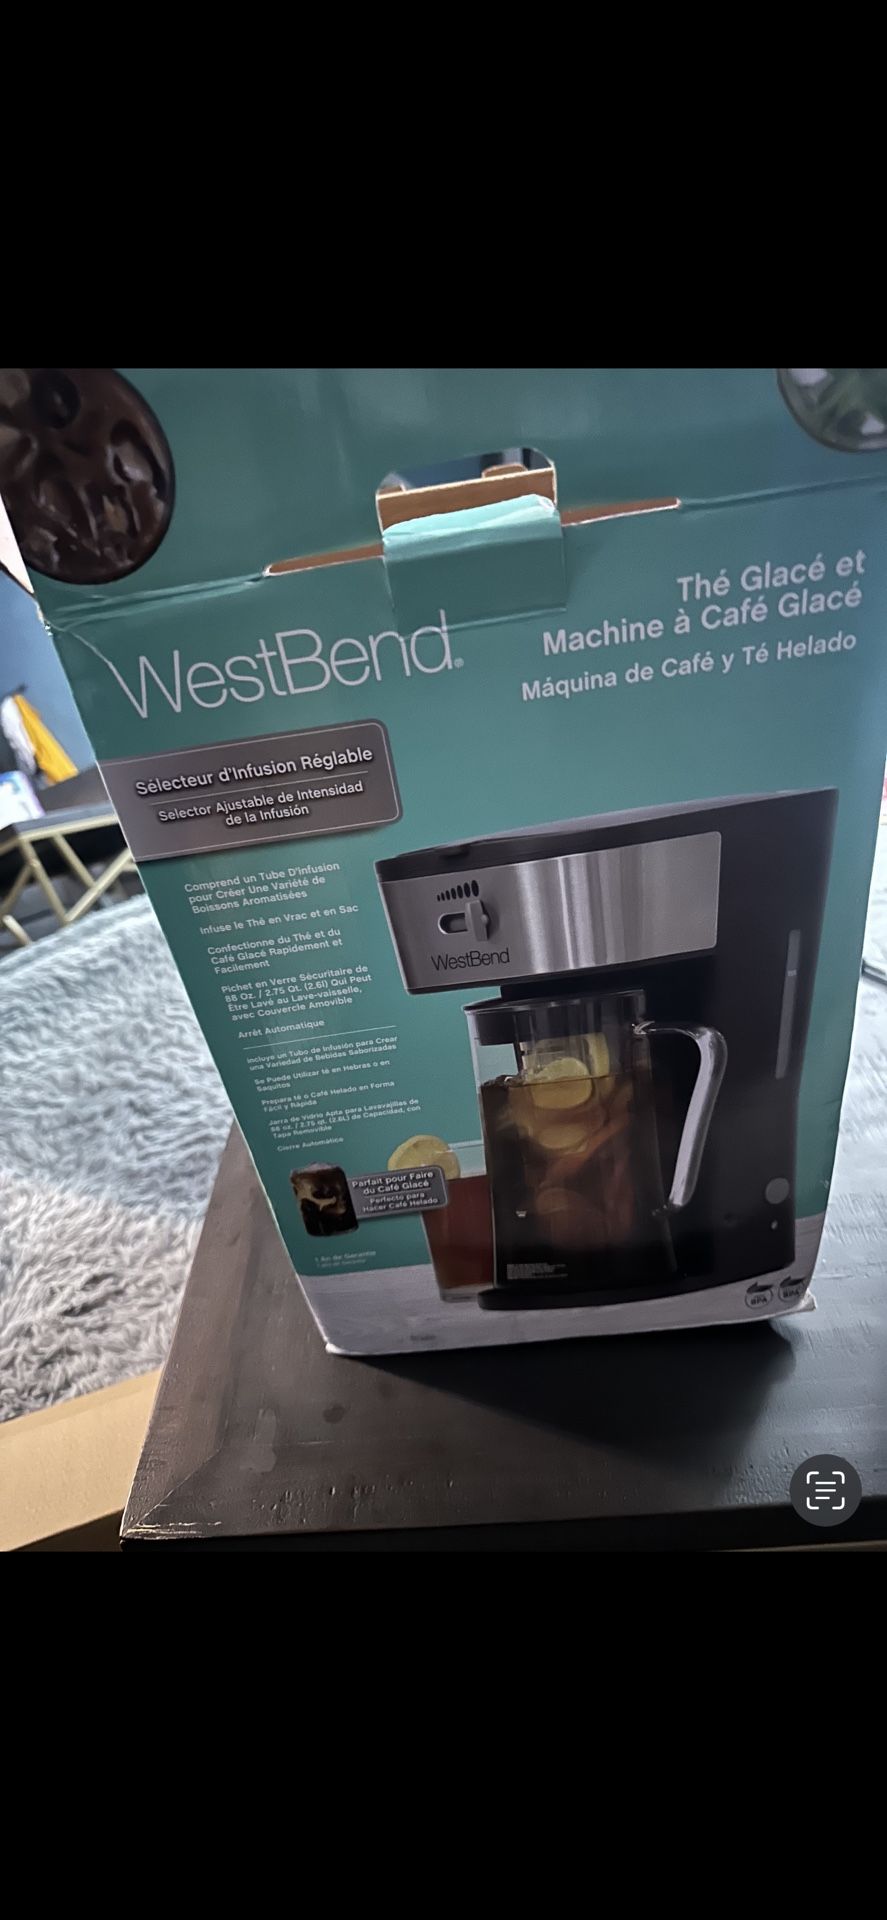 West bend Tea/coffee Cold Brewer 